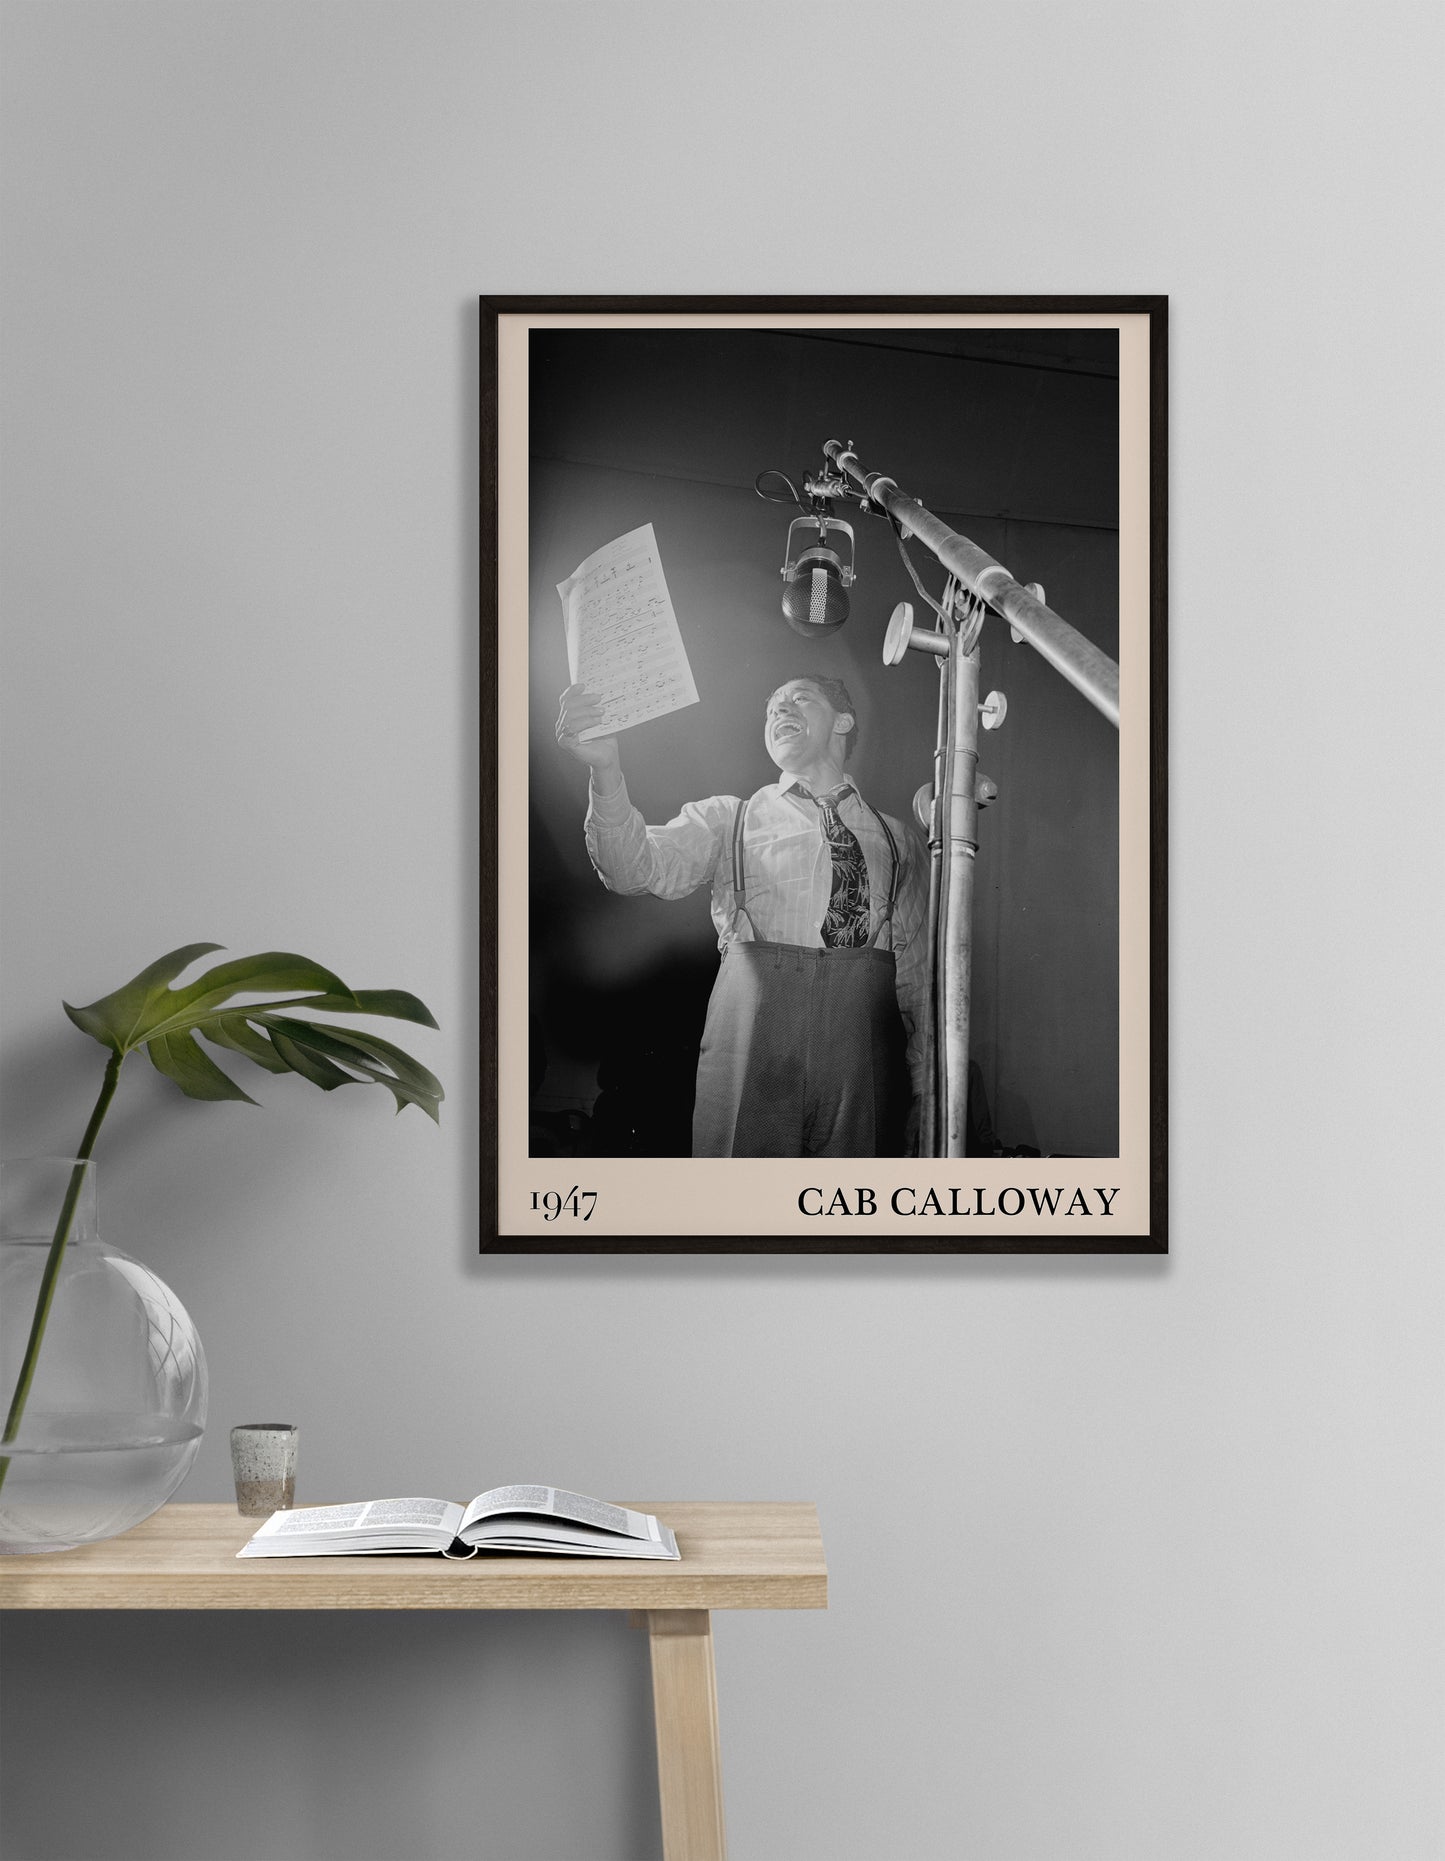 Cool 1947 photo of Cab Calloway crafted into  black framed jazz poster, hanging on a living room wall